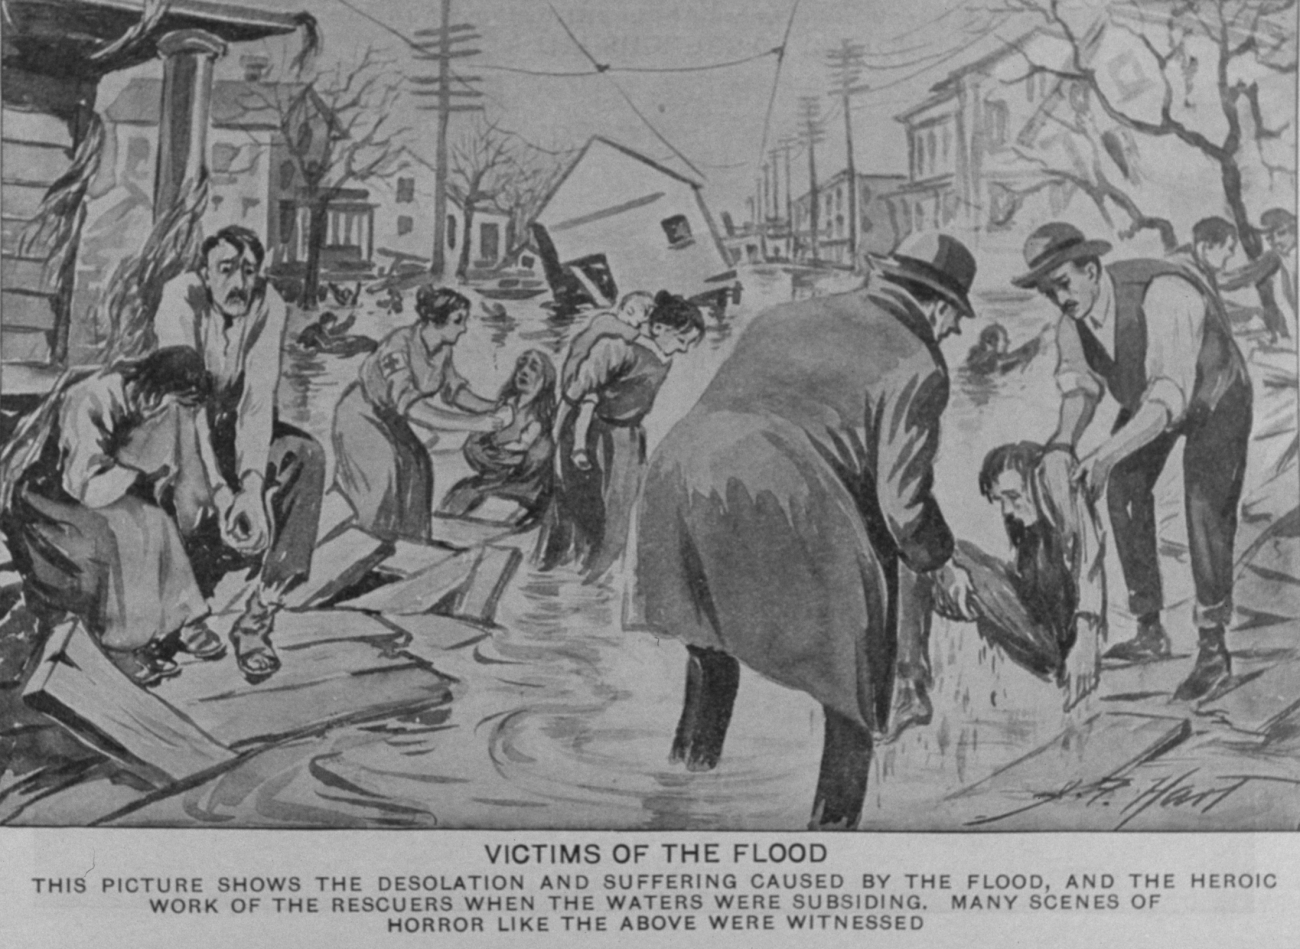 An artist's rendition of the suffering caused by the flooding